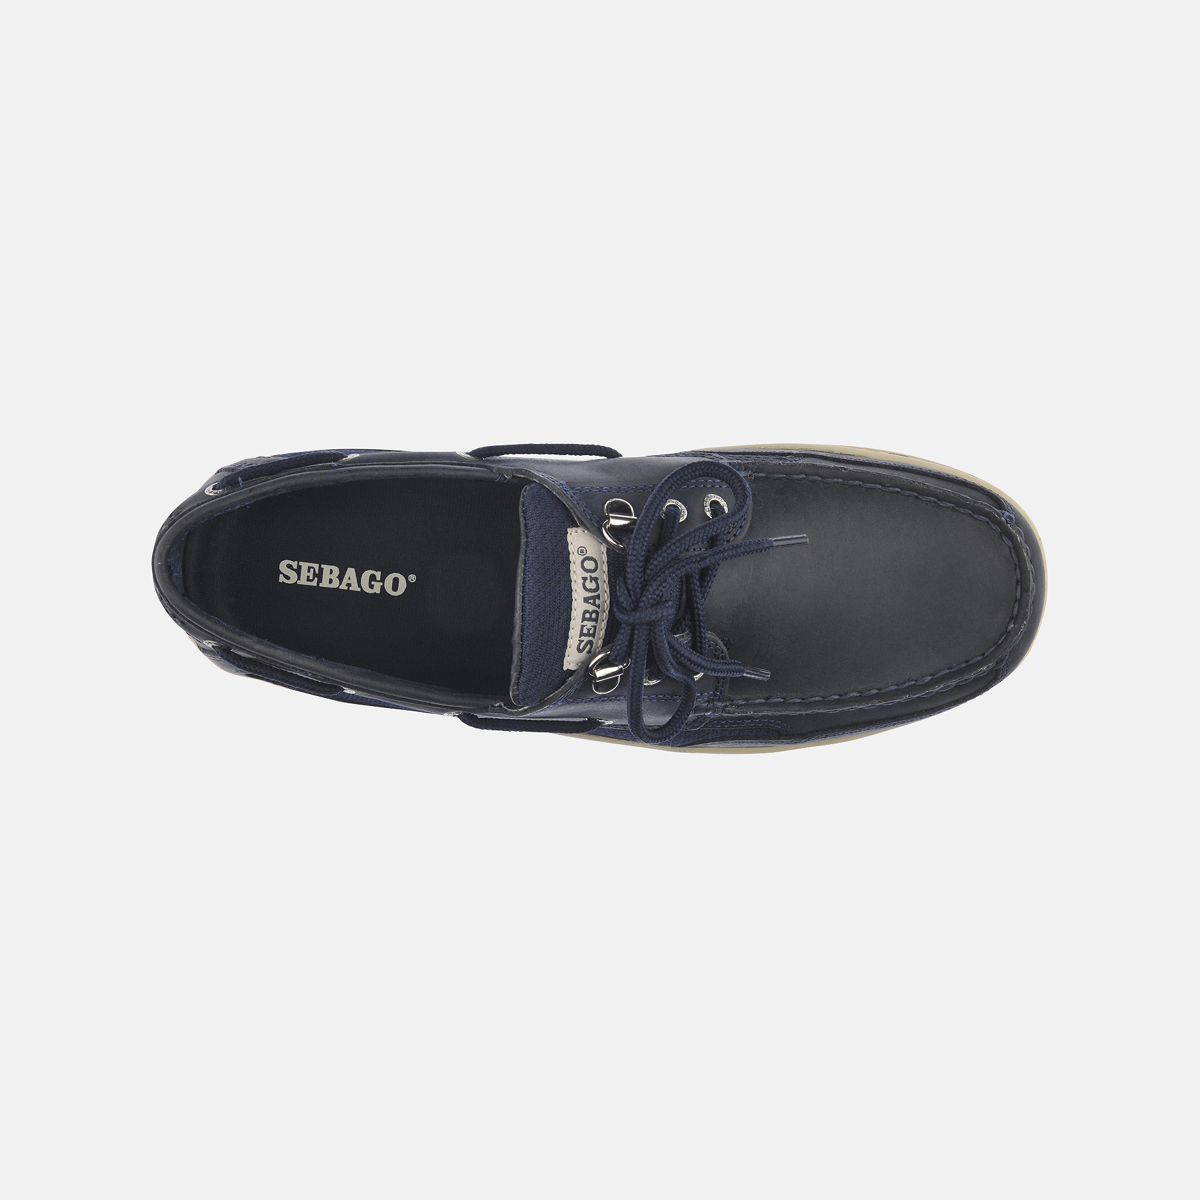 Sebago Clovehitch II chaussures bateau homme blue navy leather, taille 43,5 (US 9.5)